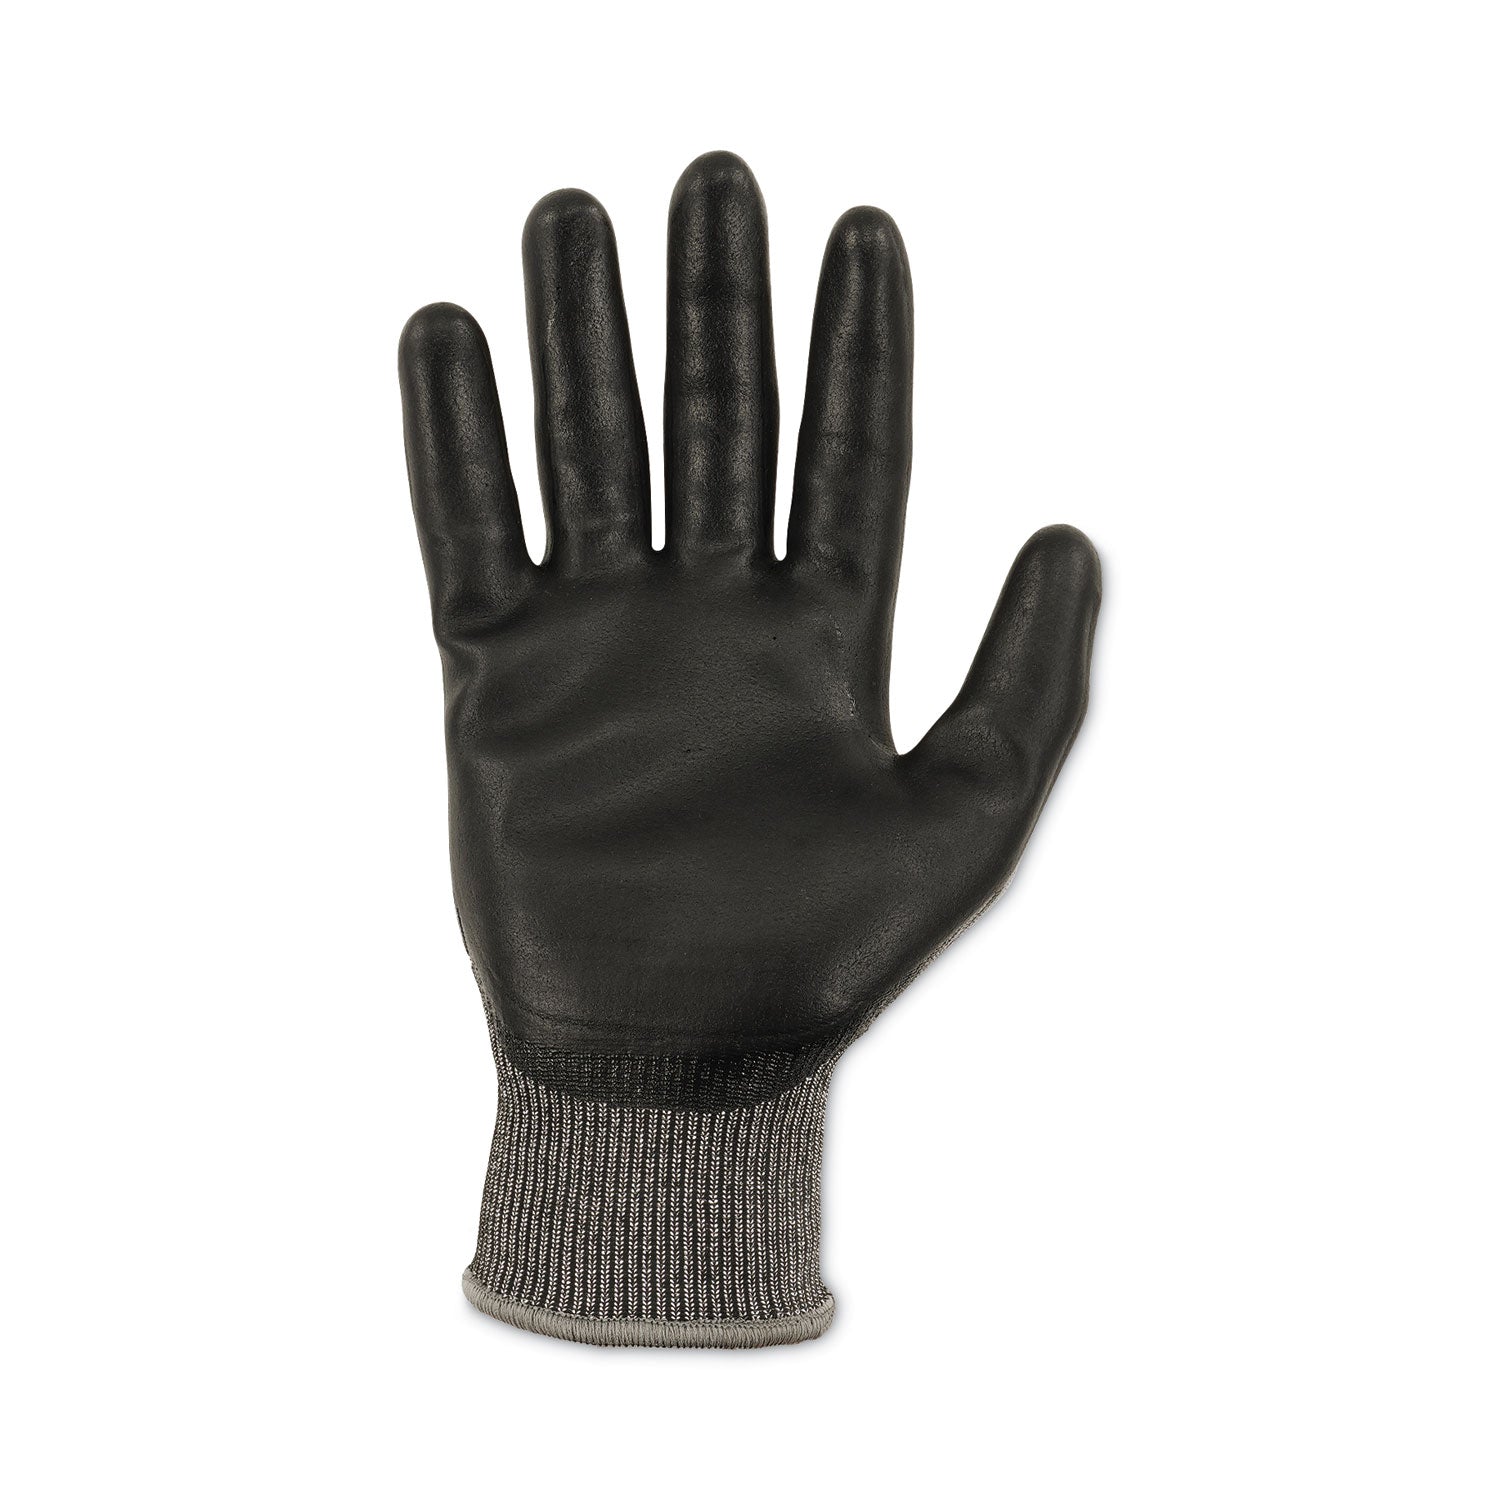 proflex-7072-ansi-a7-nitrile-coated-cr-gloves-gray-x-large-pair-ships-in-1-3-business-days_ego10315 - 6